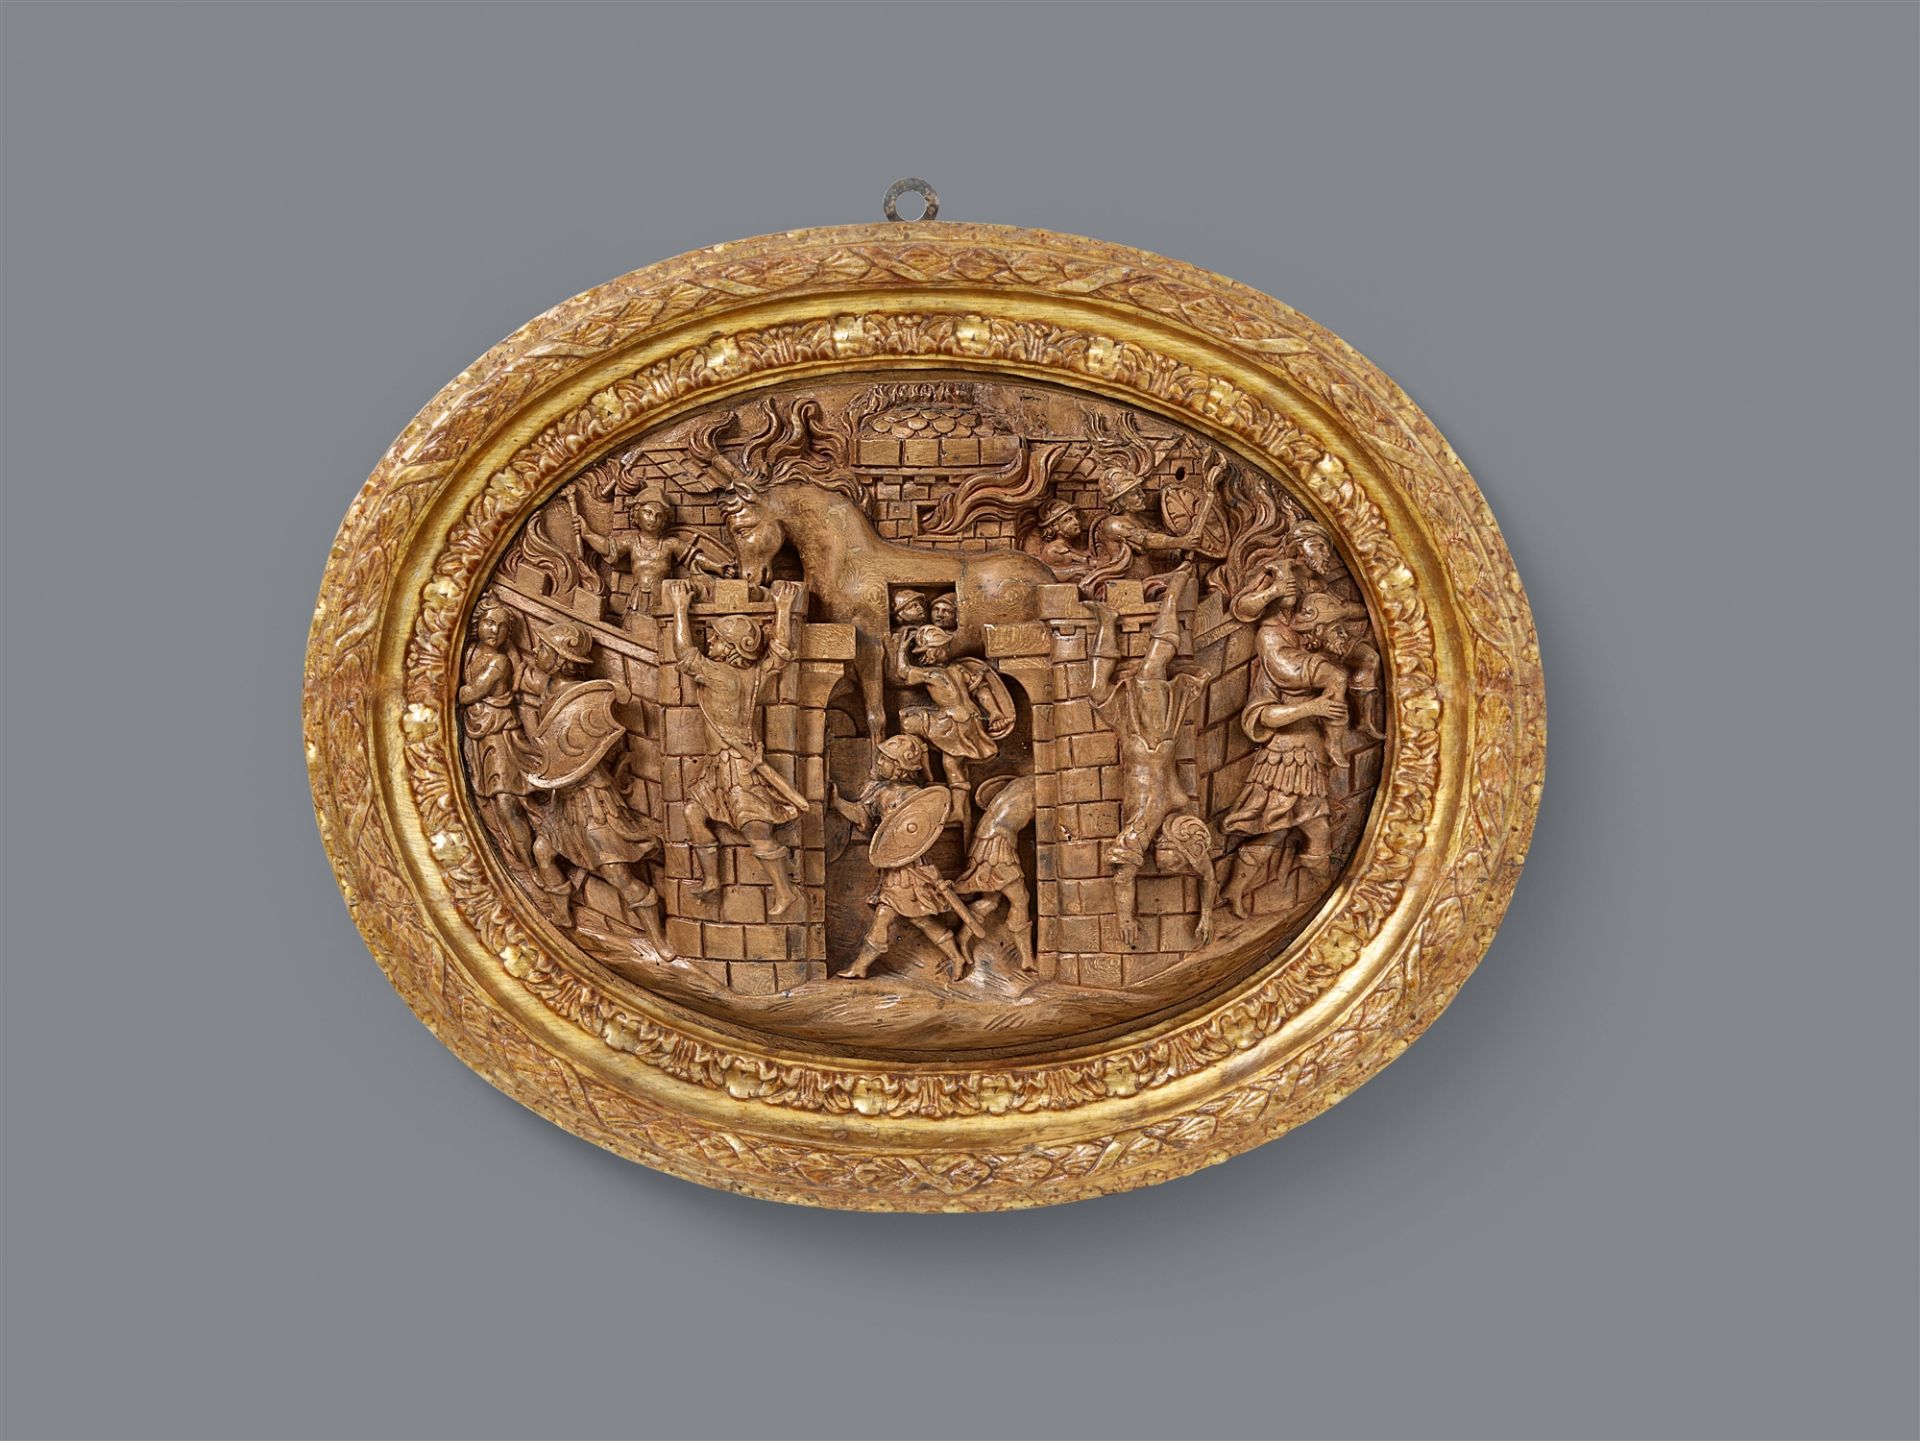 Two 17th century Italian fruitwood reliefs with scenes from the Trojan war - Image 2 of 2